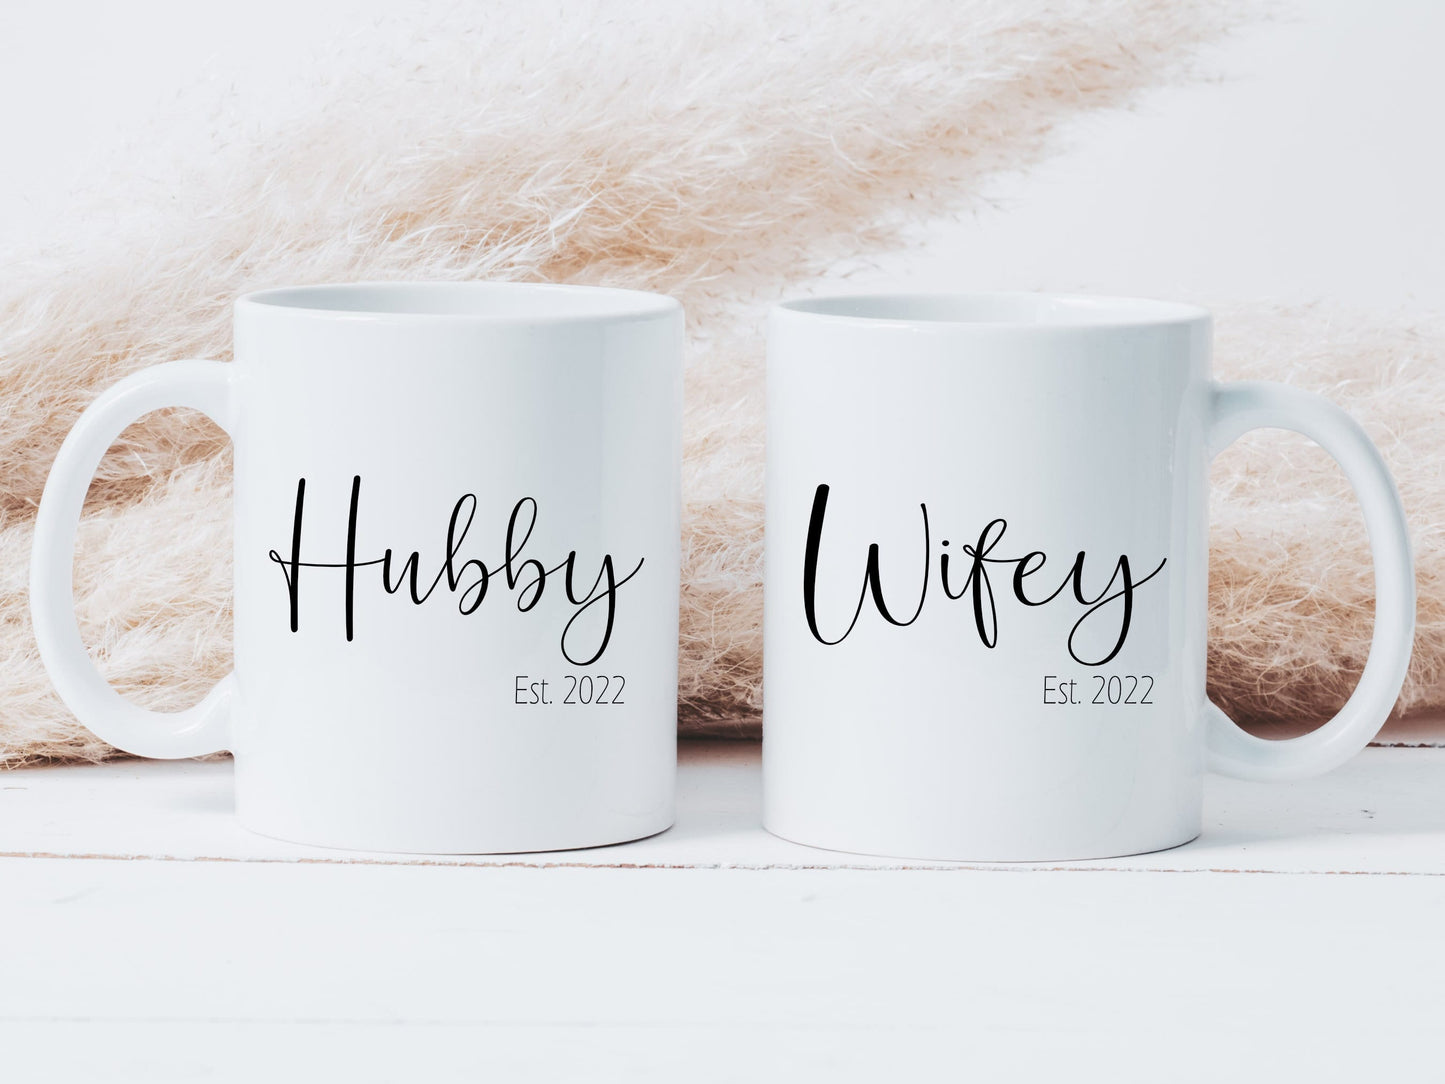 two white mugs with a boho style grass behind. One mug has the text hubby printed on in a script font and smaller text below stating est. 2022. The other mug is similar with the word wifey on.